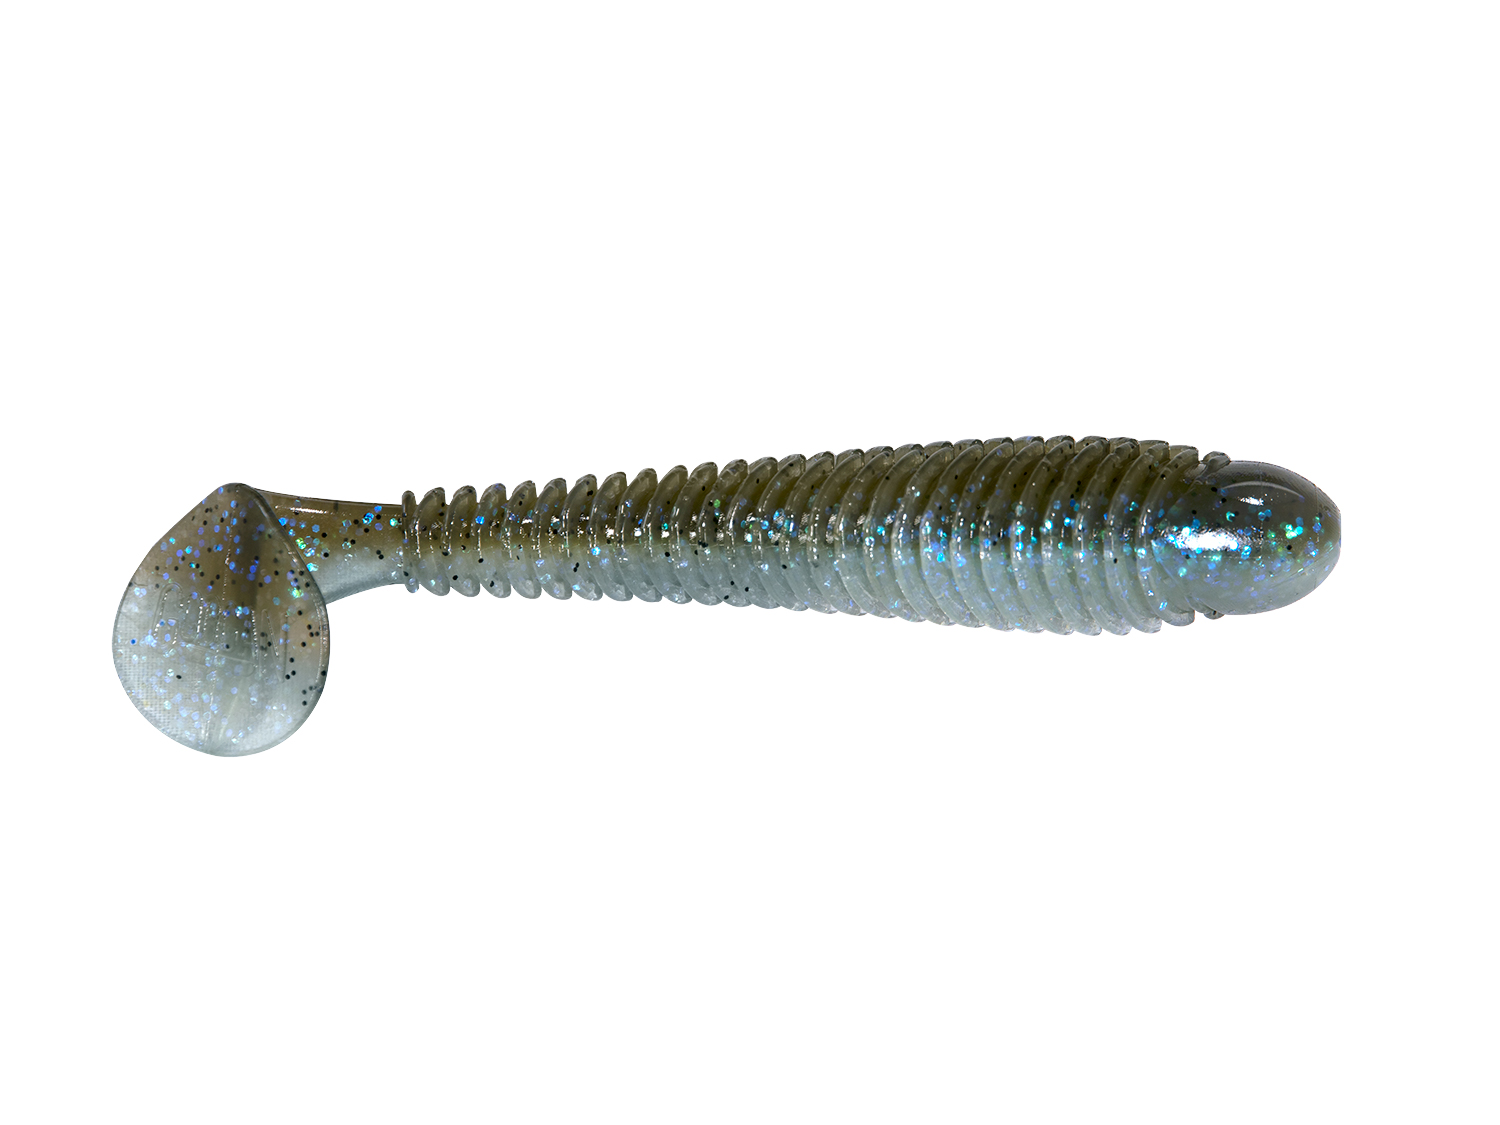 Googan Baits Saucy Swimmer 2.8 Electric Shad 9pack